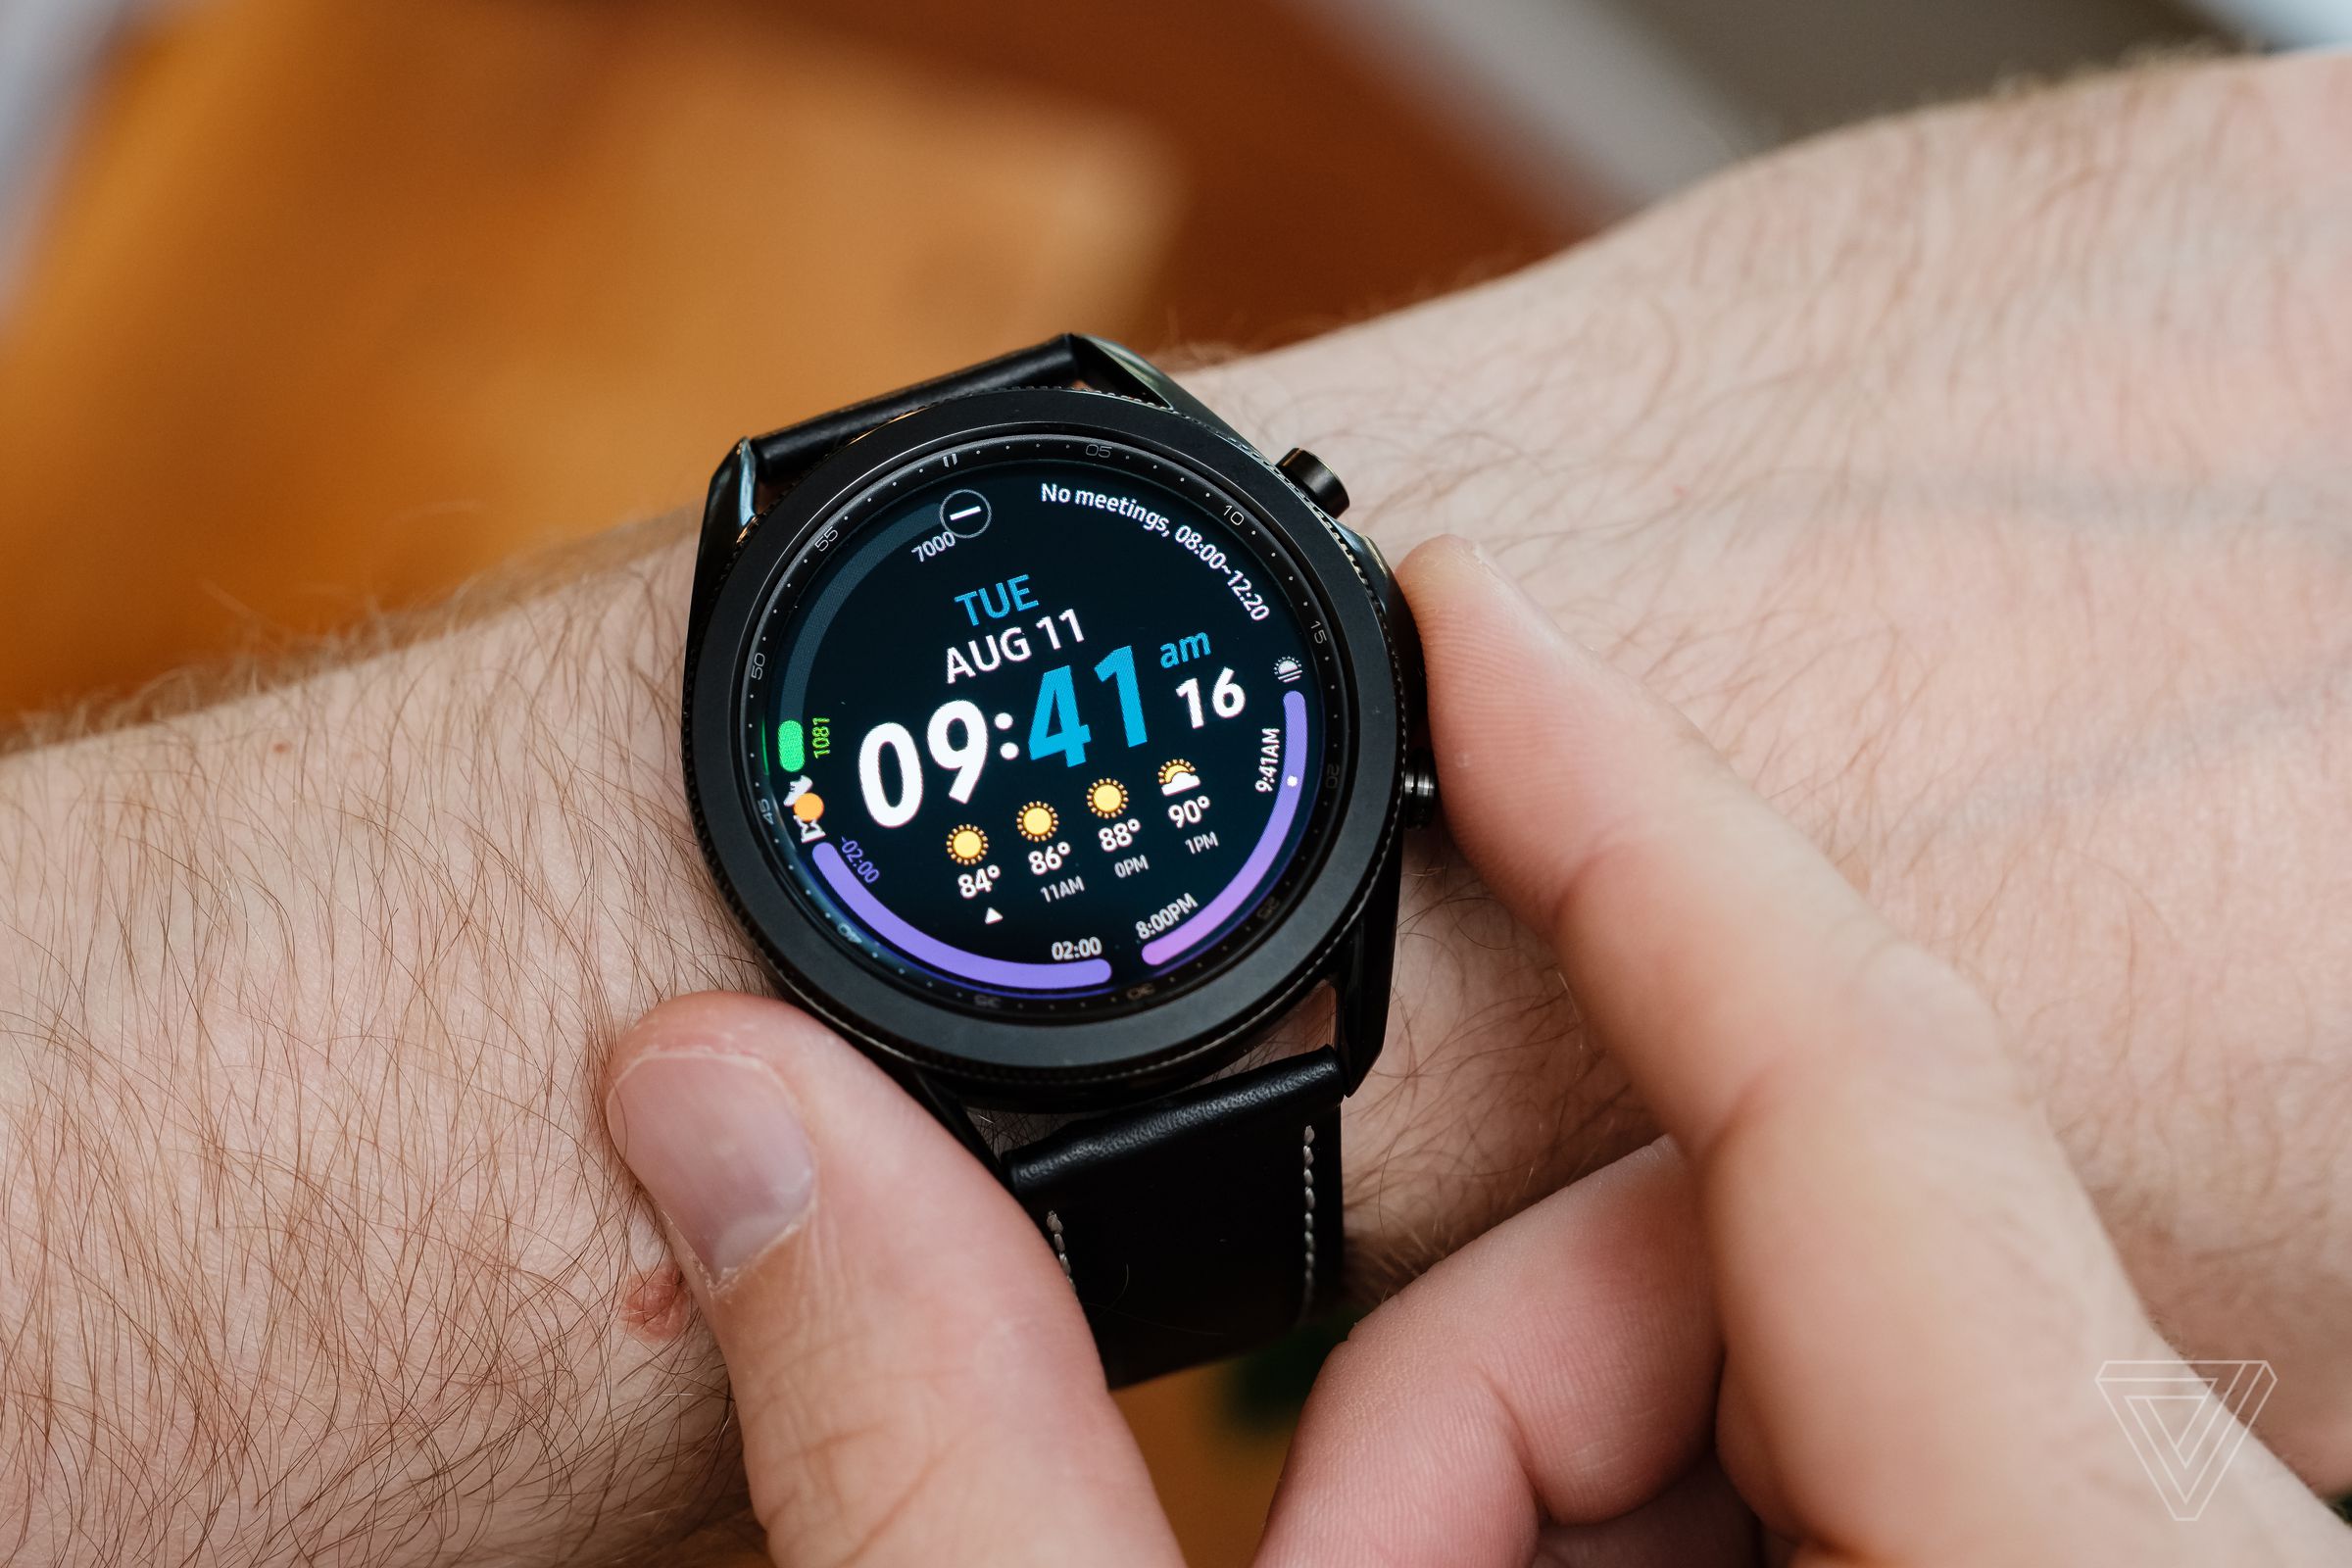 The rotating bezel on the Samsung Galaxy Watch 3.